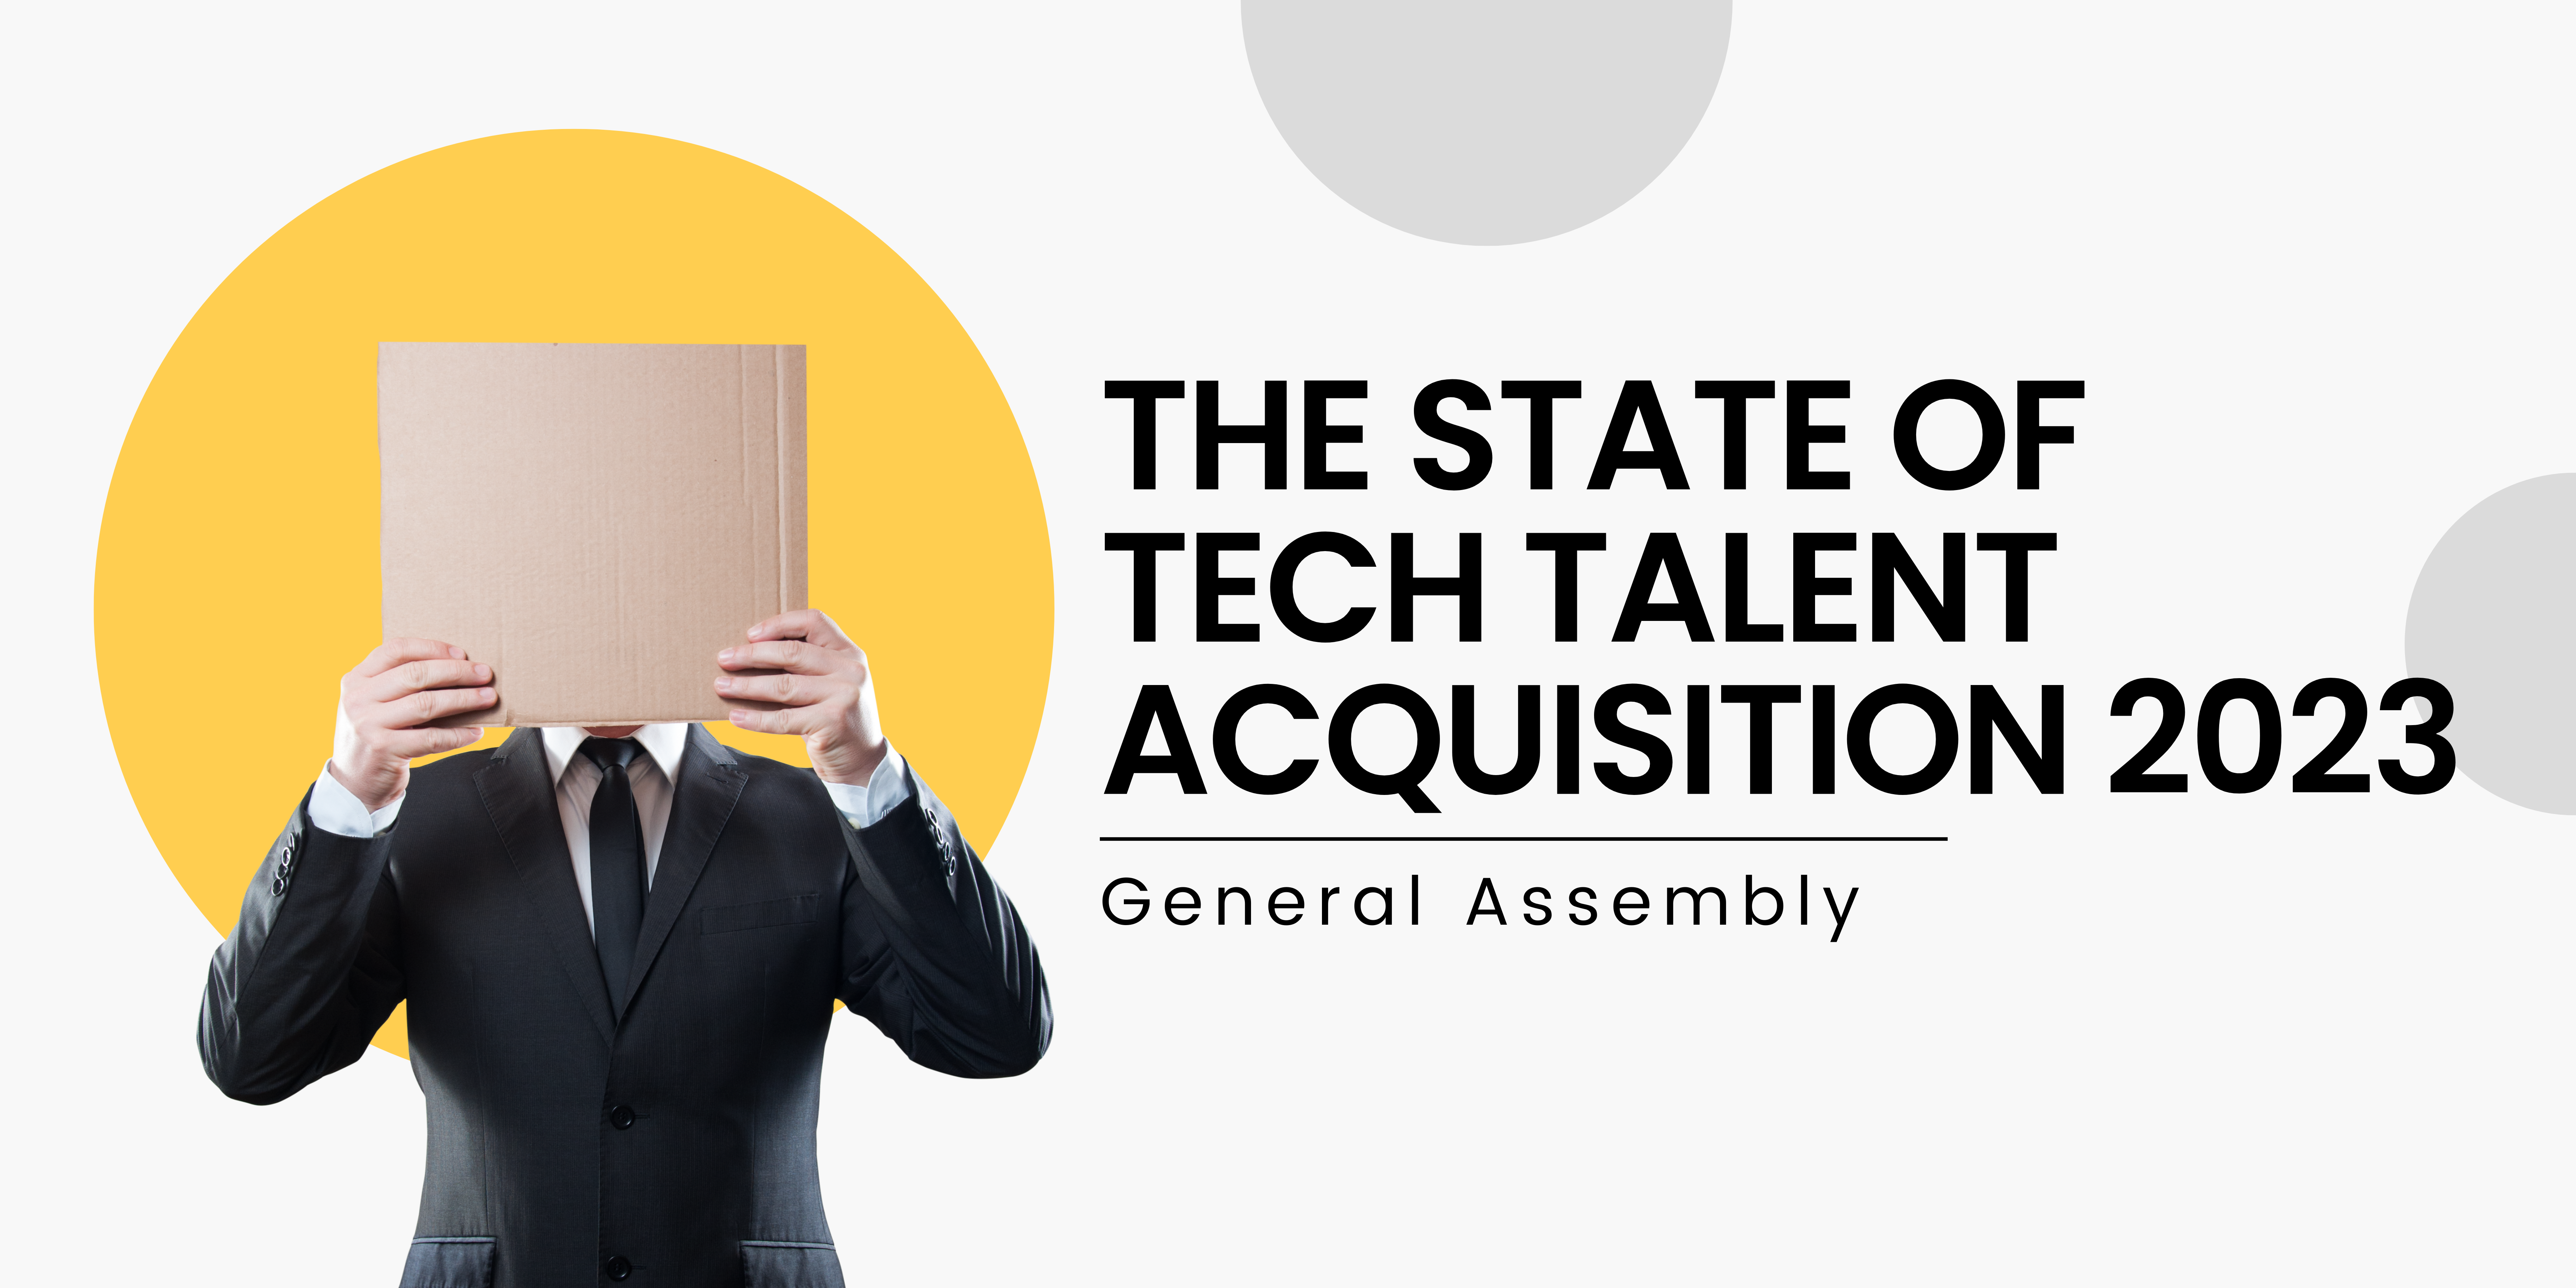 (GA) The State of Tech Talent Acquisition 2023